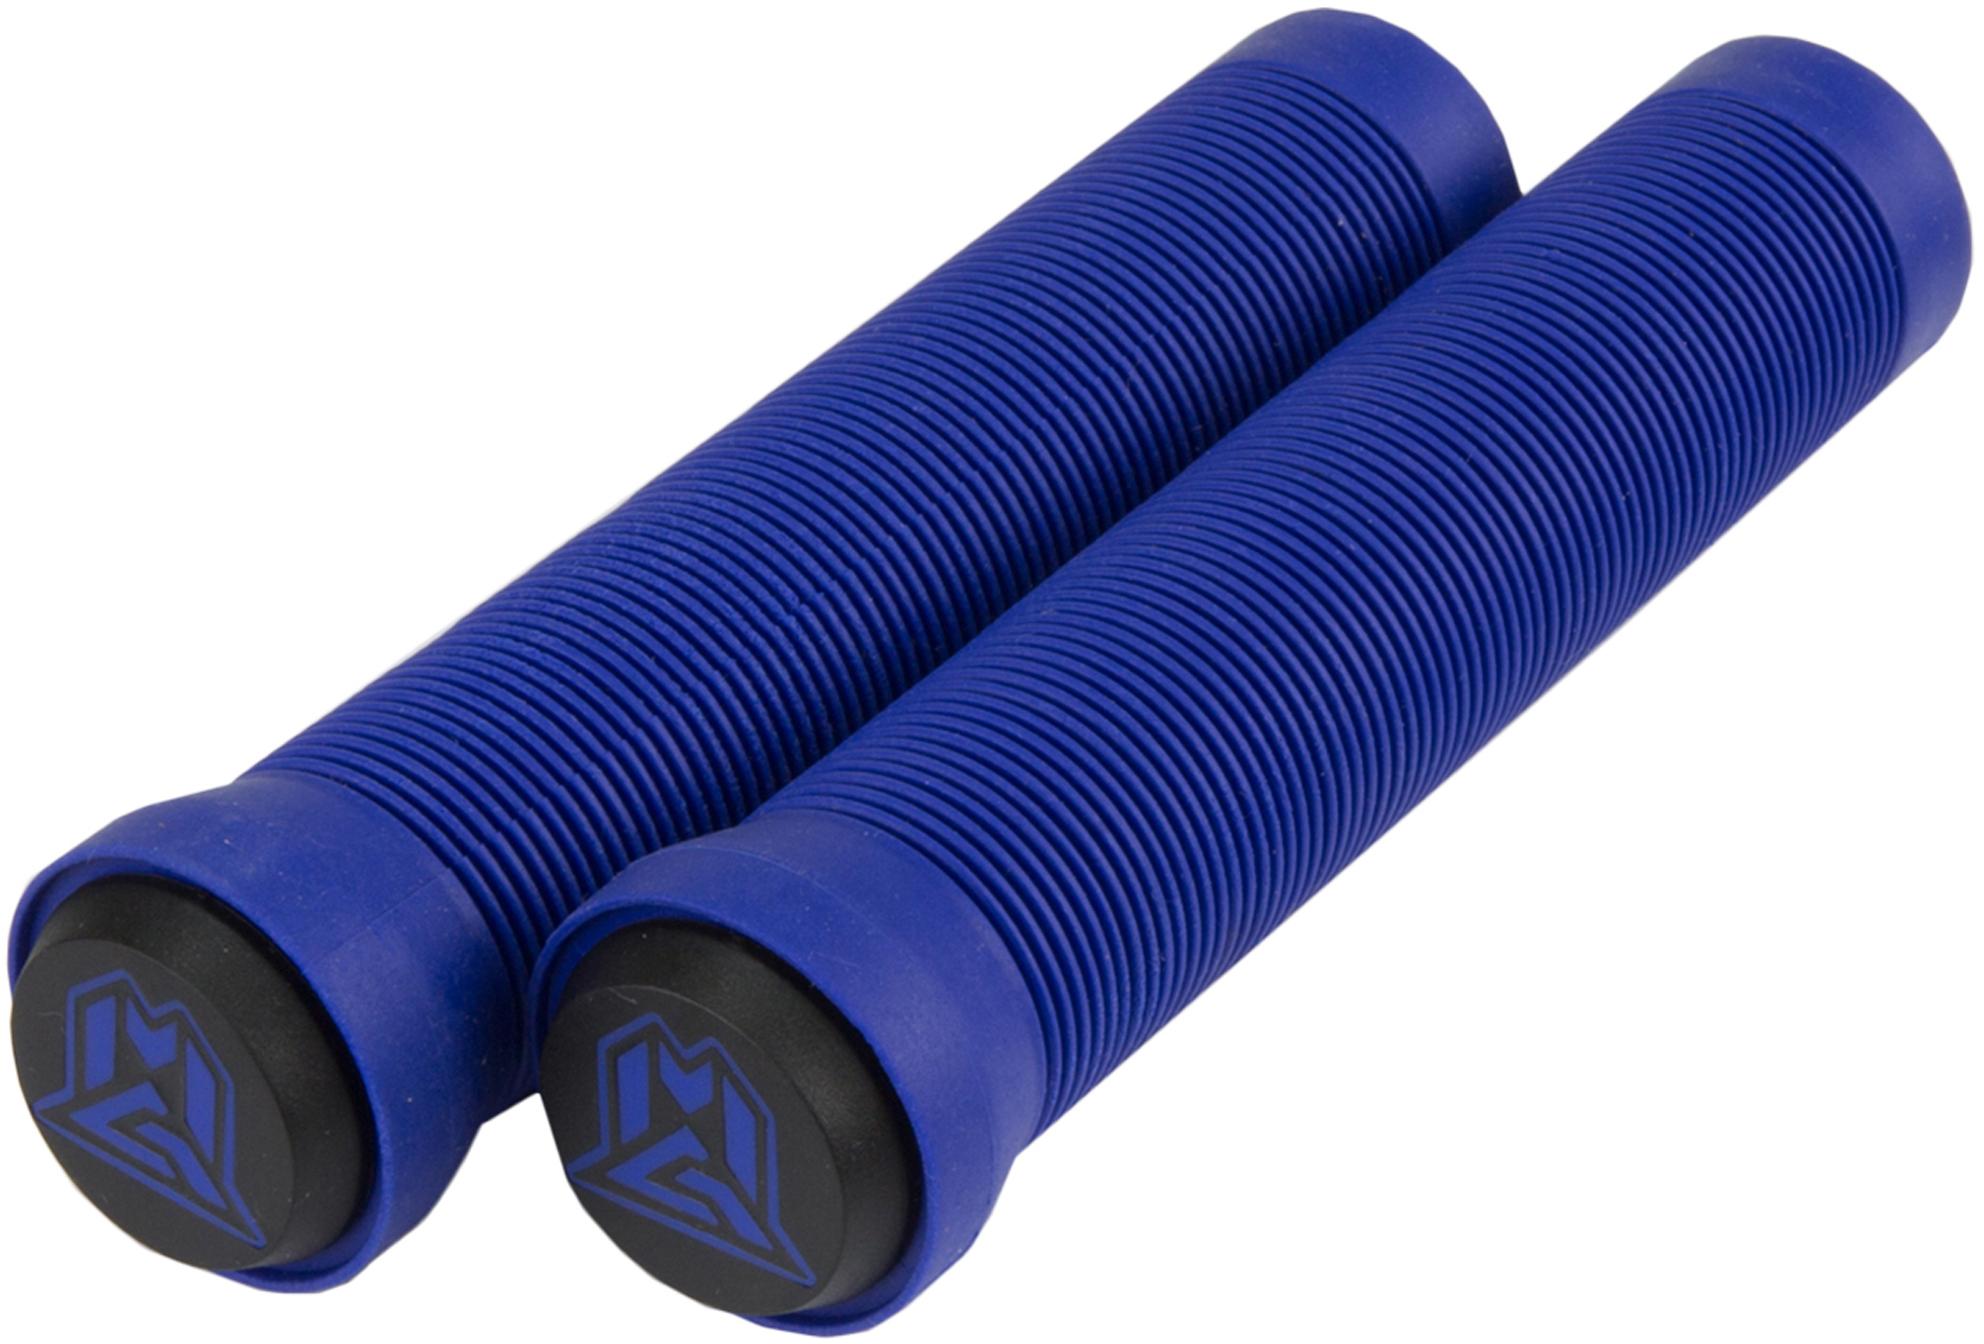 Mgp 150Mm Grind Grips With Bar Ends - Blue